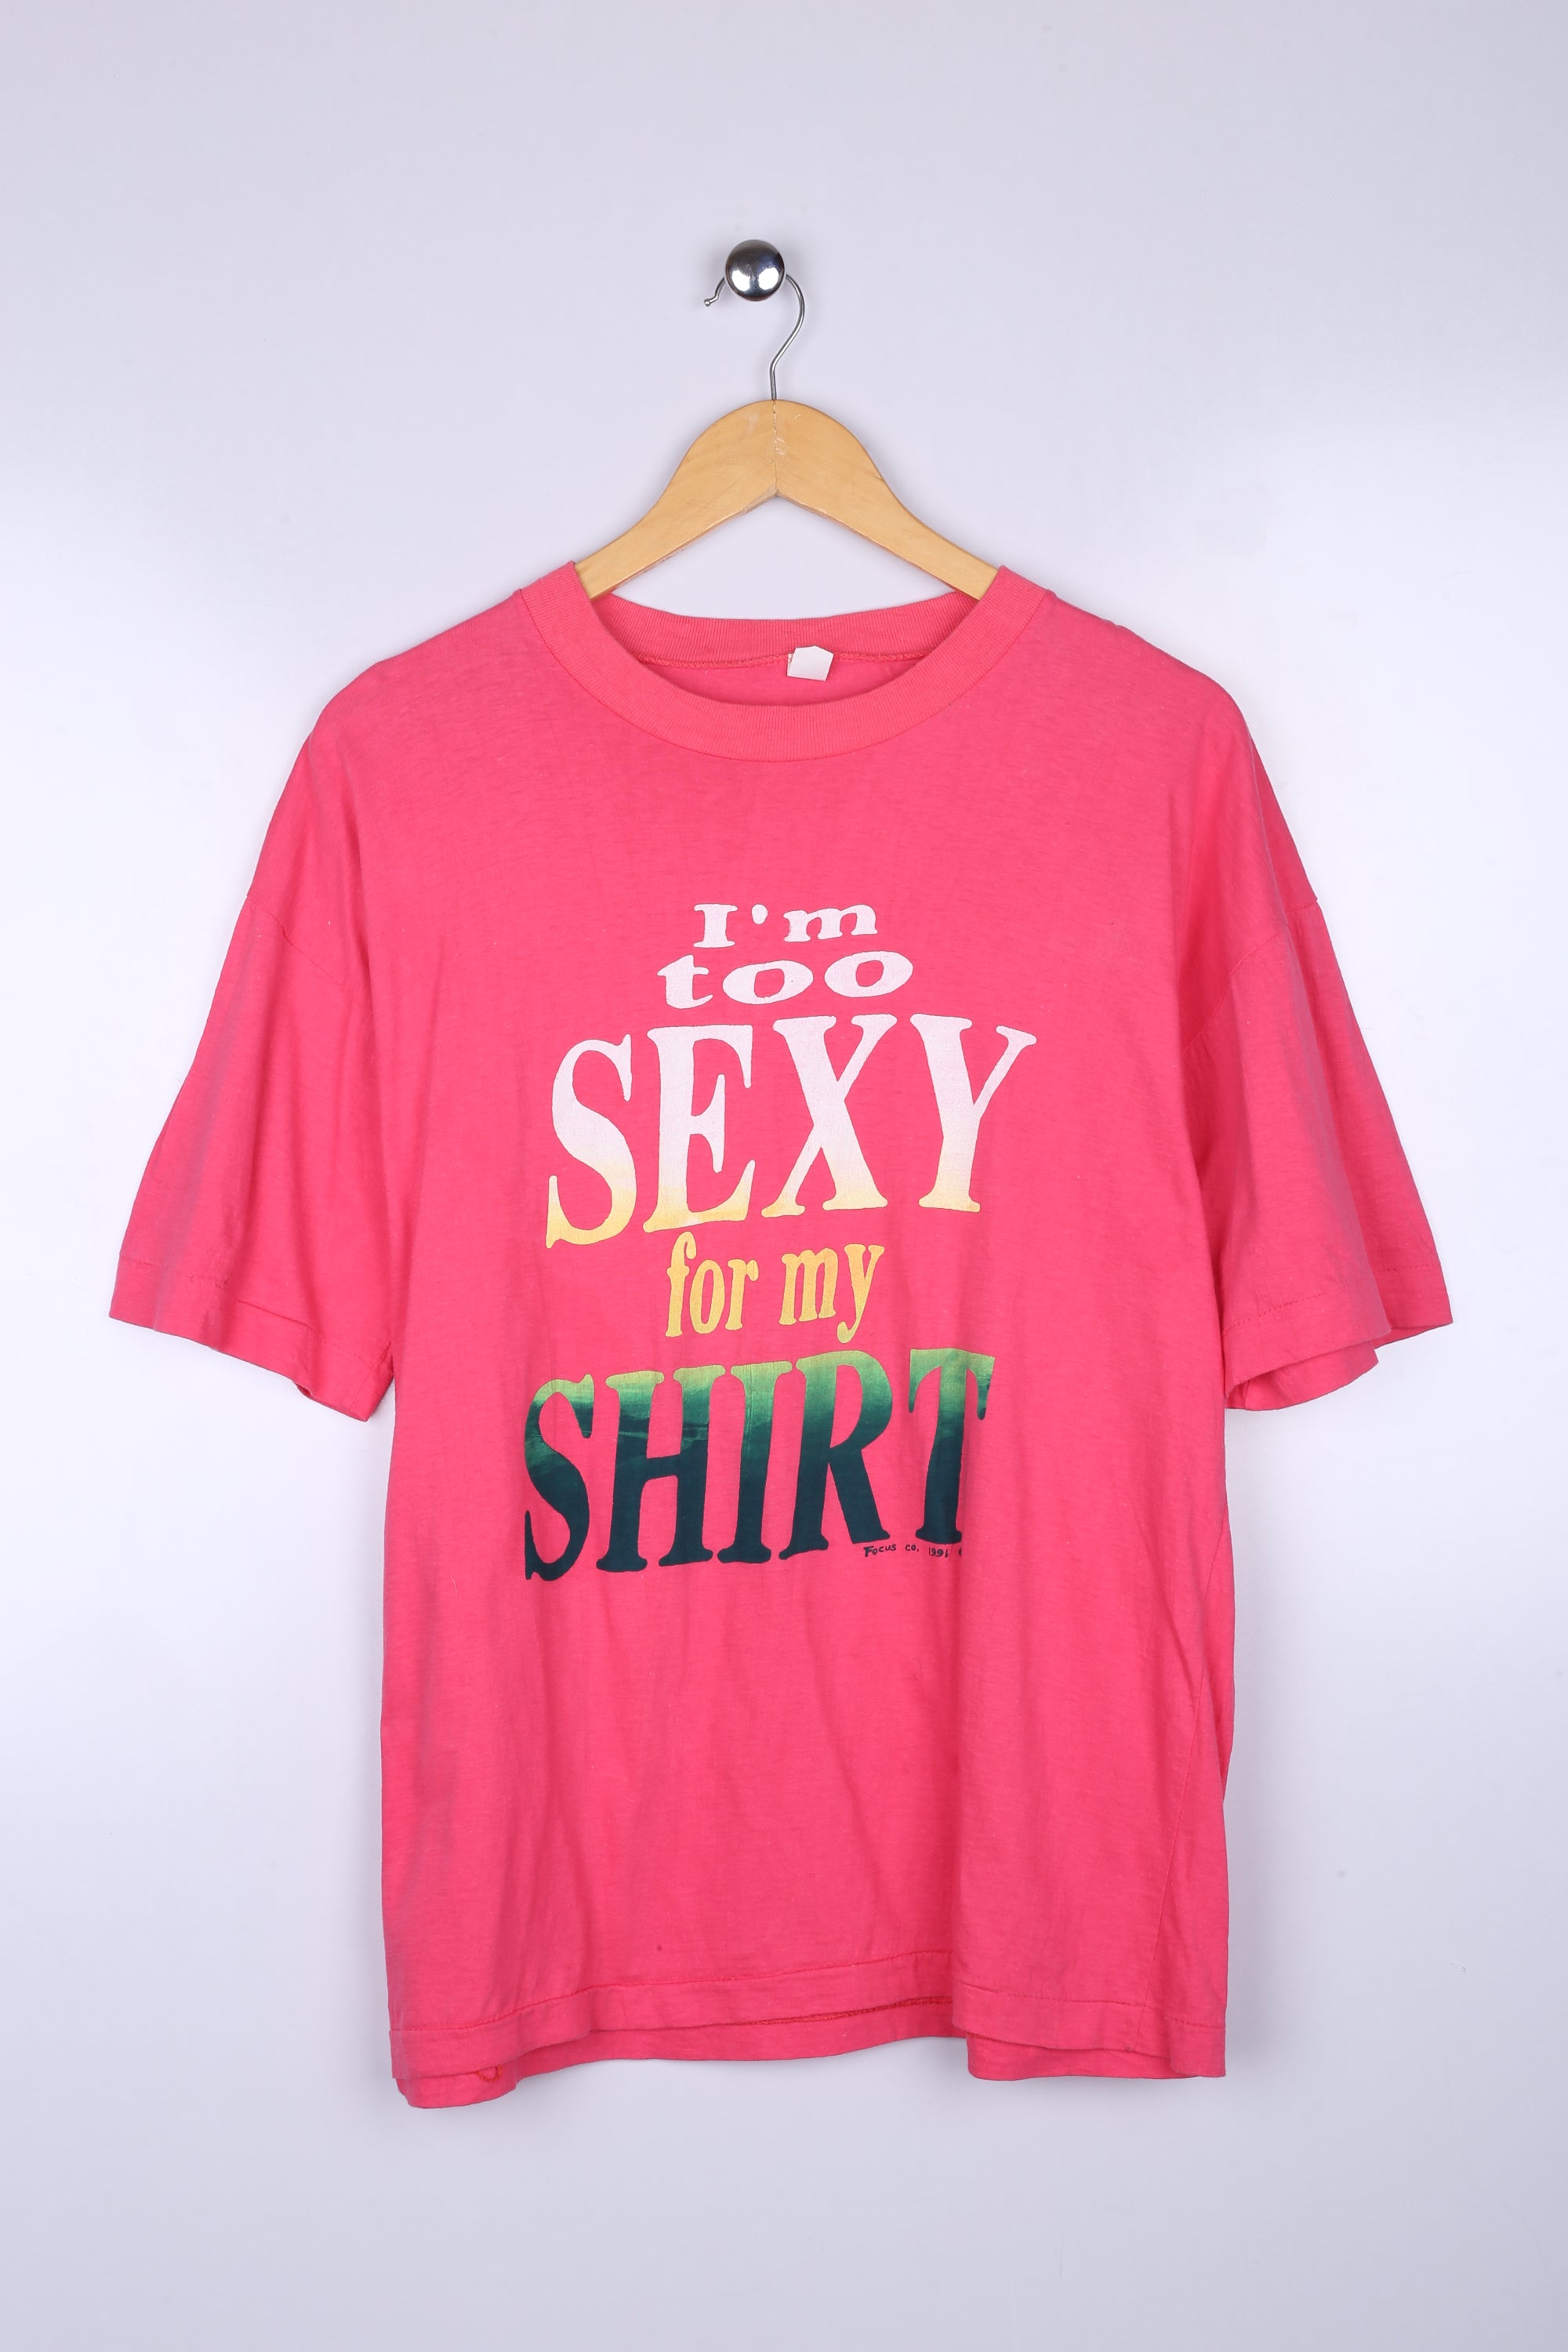 Vintage Too Sexy Graphic Tee Pink Large